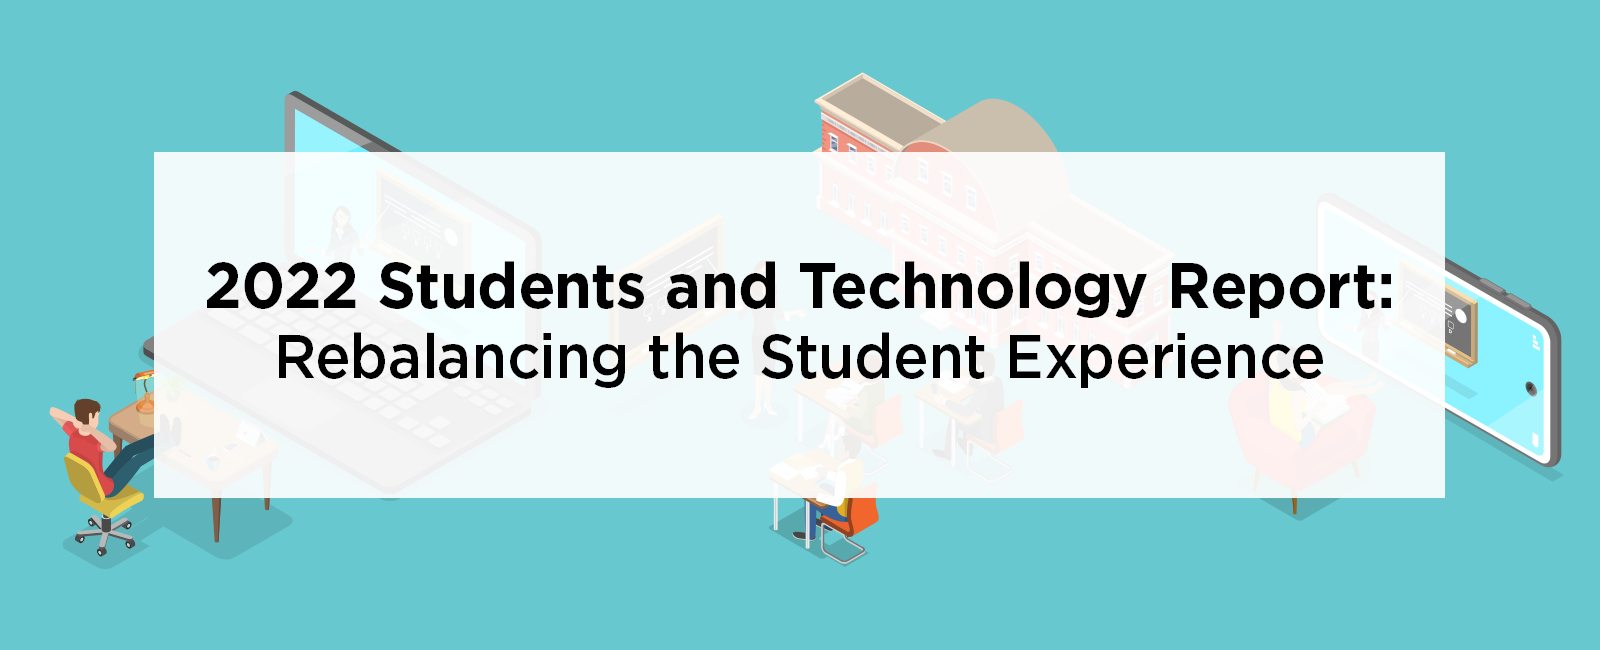 2022 Students and Technology Report: Rebalancing the Student Experience